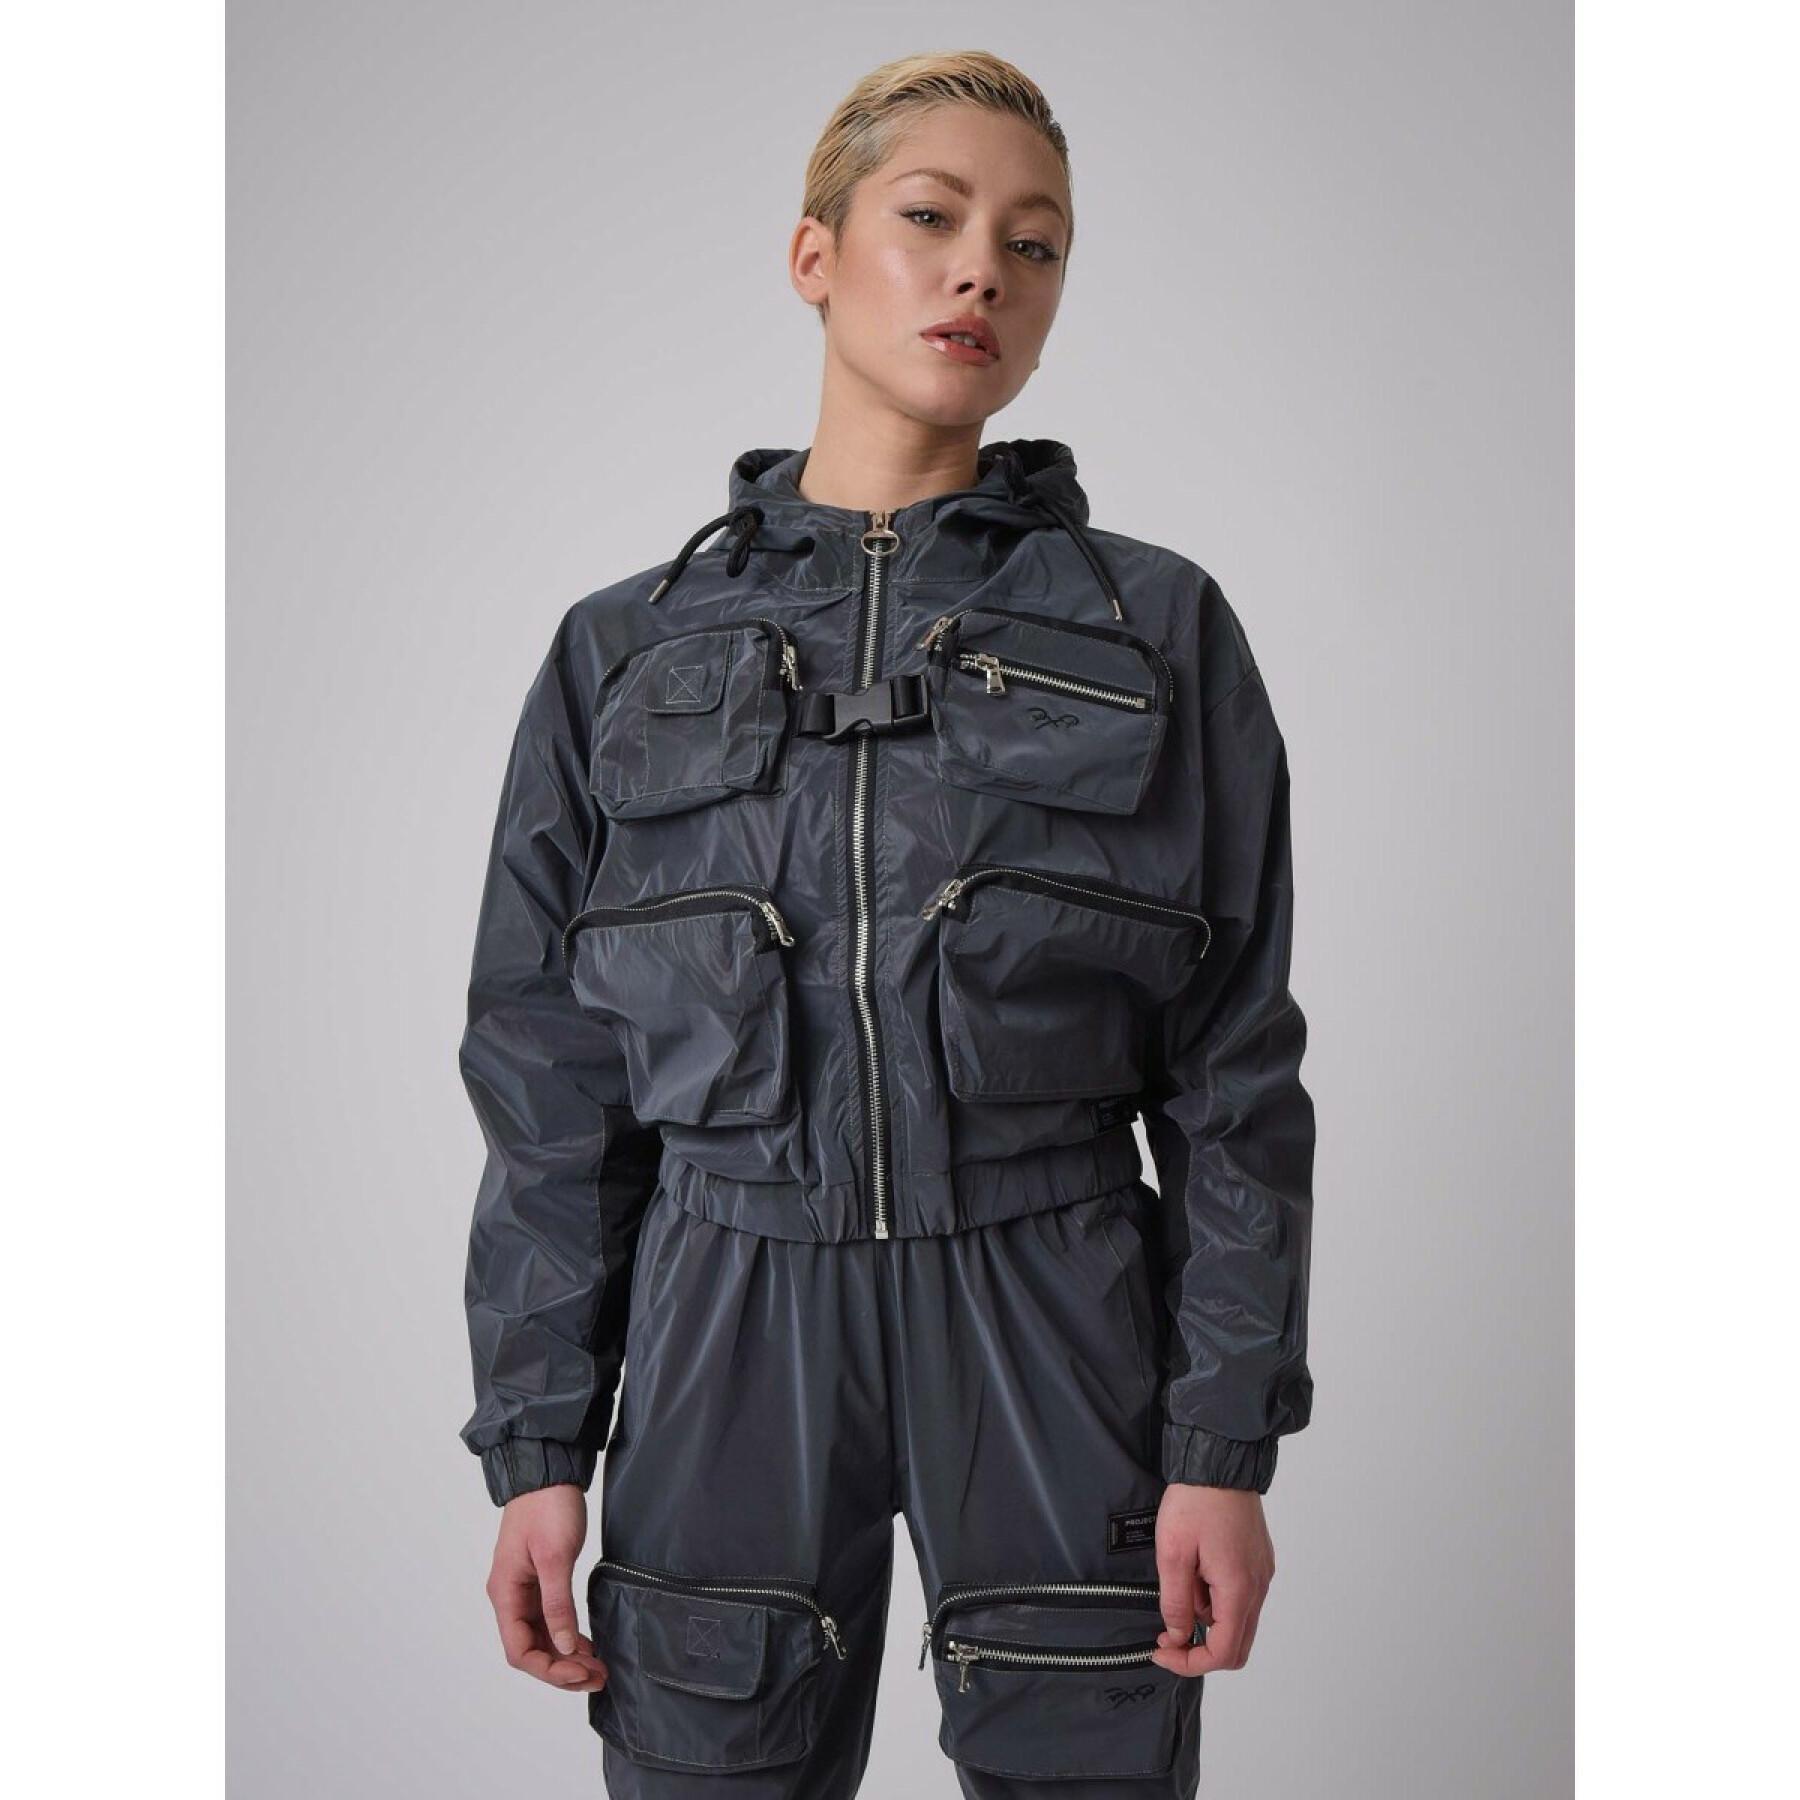 Women's reflect hooded jacket with relief pockets Project X Paris